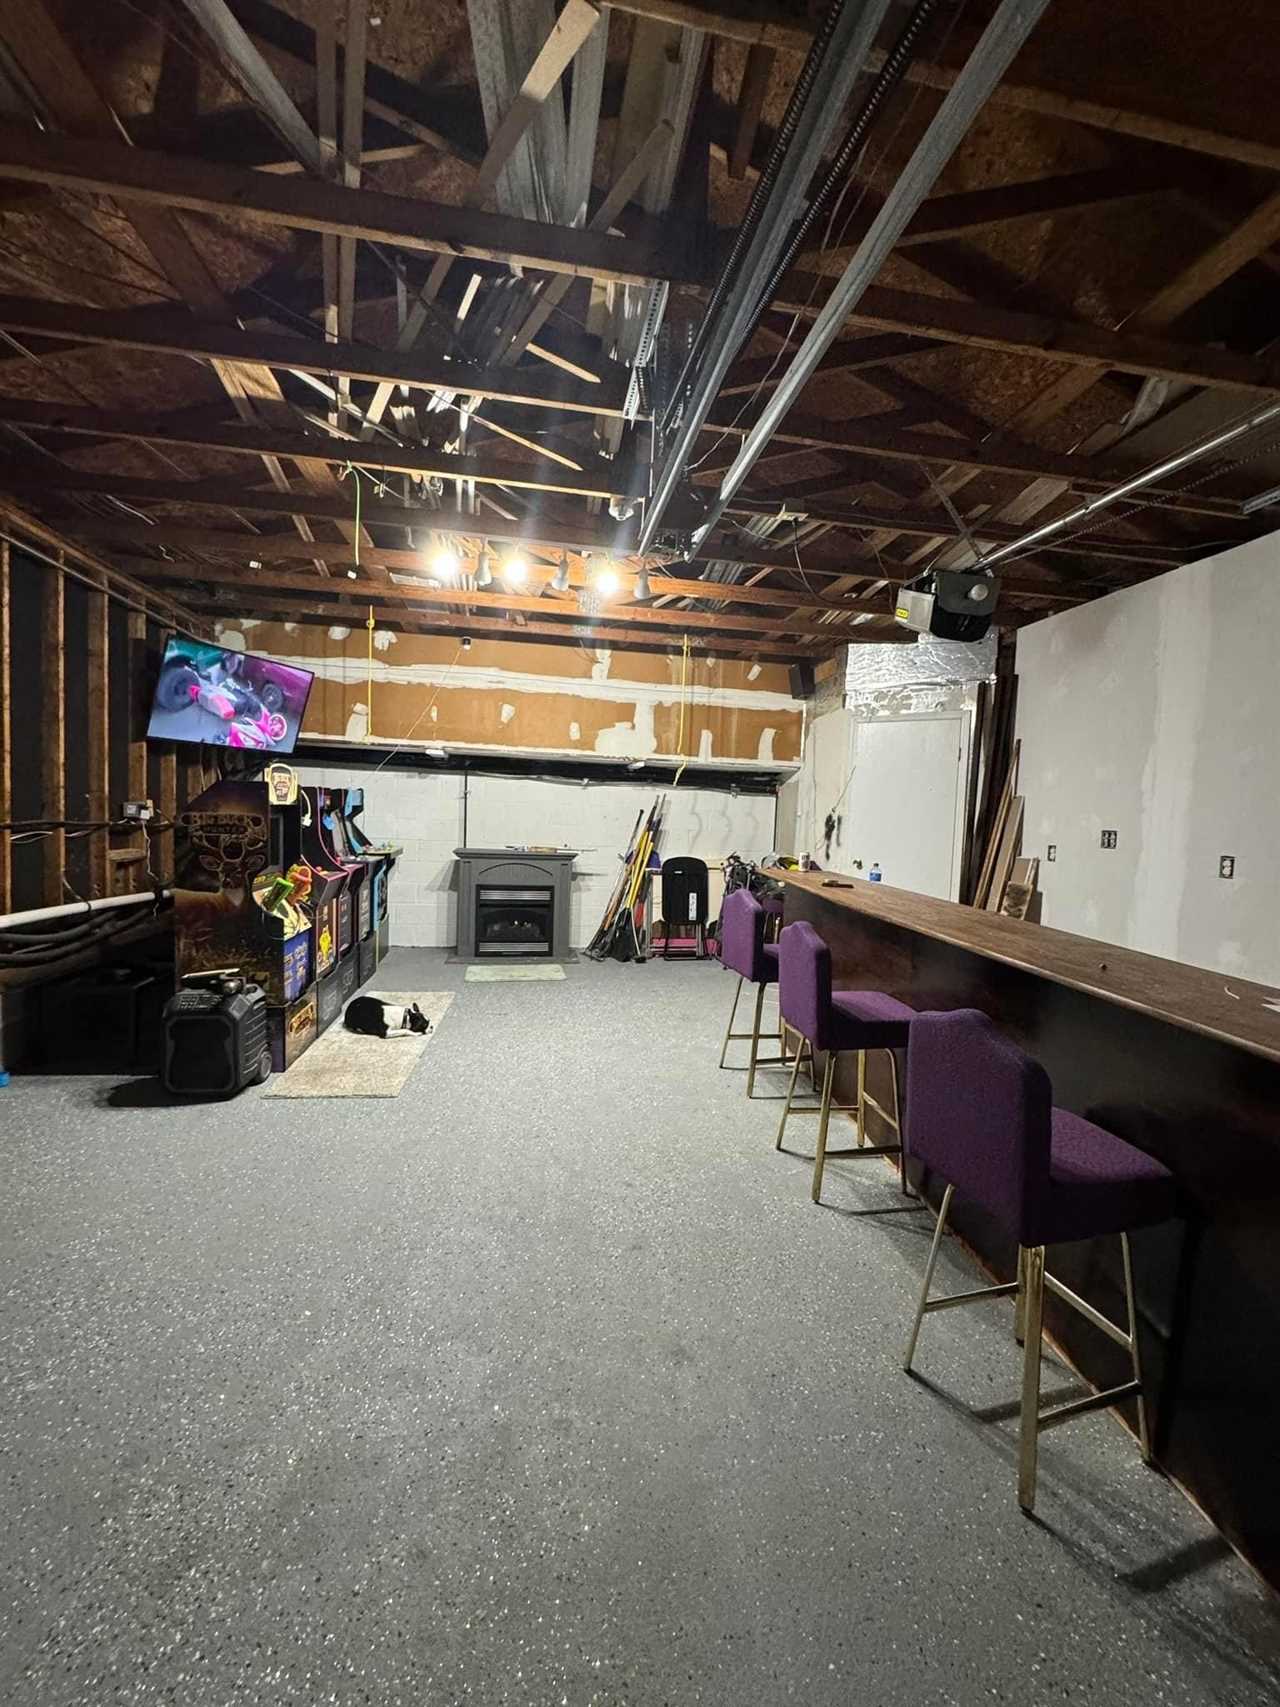 A garage under renovation with a bar and arcade games.